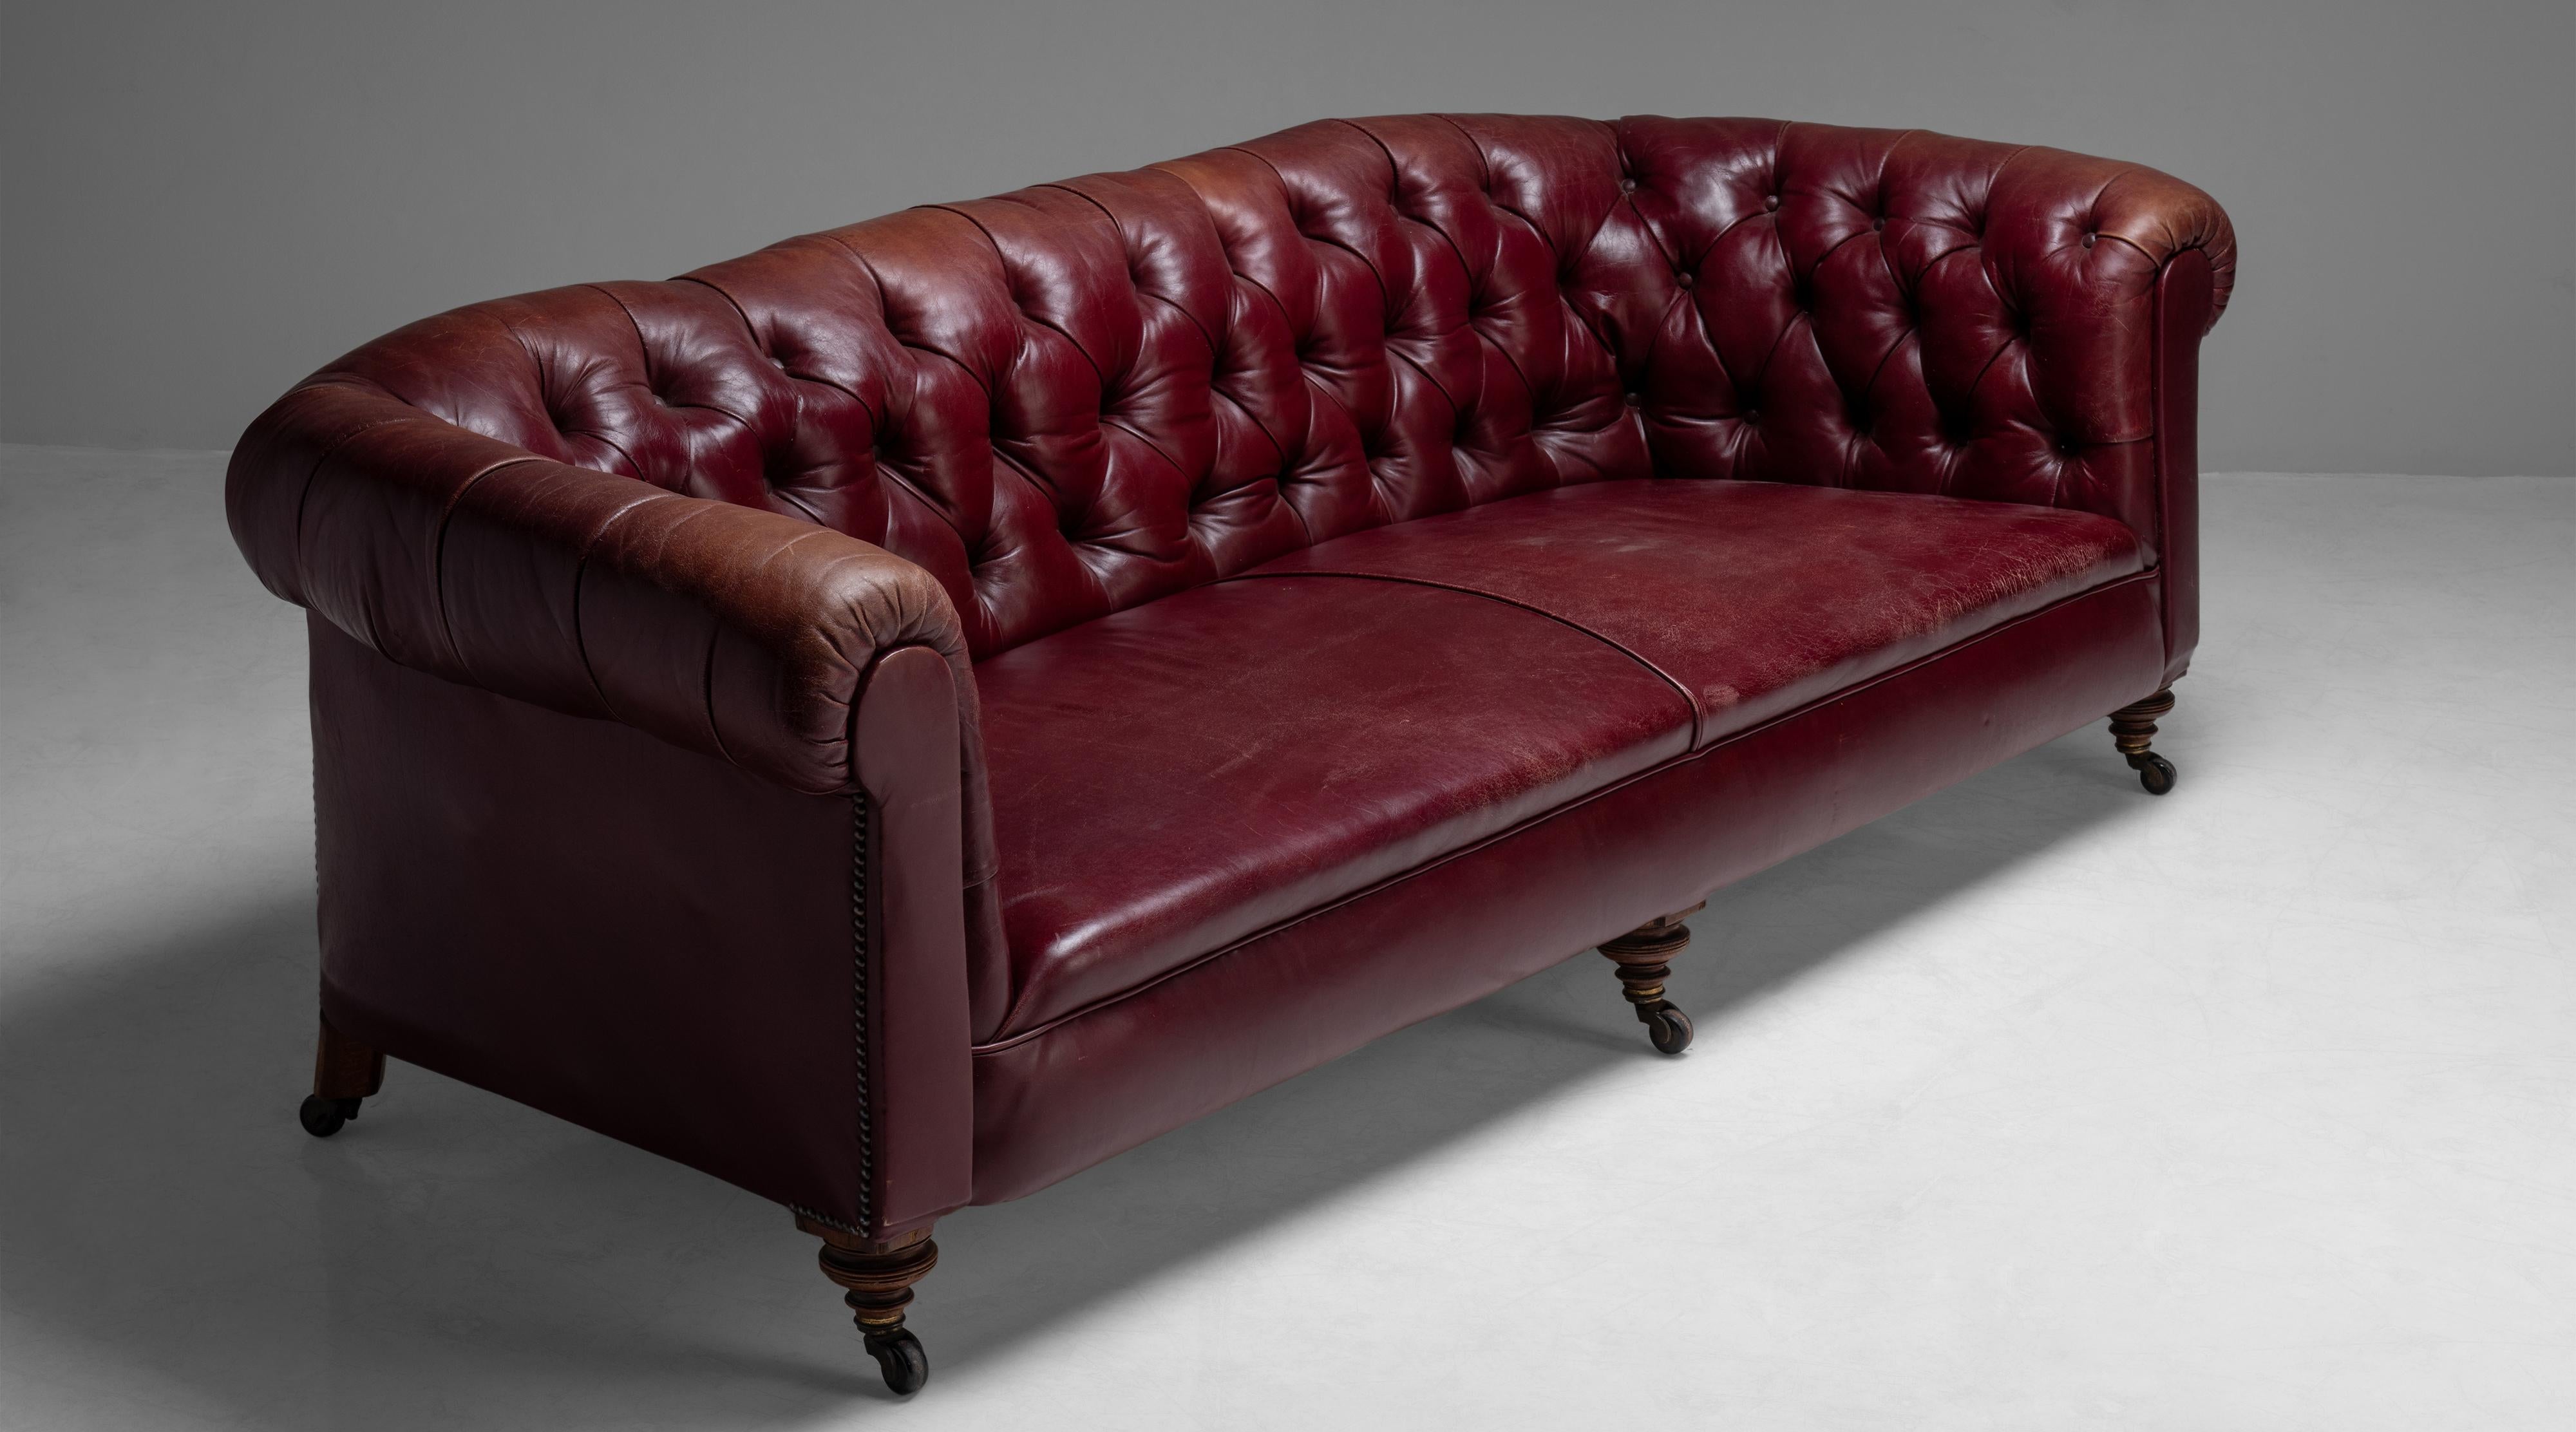 Edwardian Chesterfield sofa
England circa 1890
Deep button back Chesterfield with original red leather upholstery on turned feet with castors.
Measures: 90.75”W x 40”D x 28.5” H
 
$ 9,500.
  